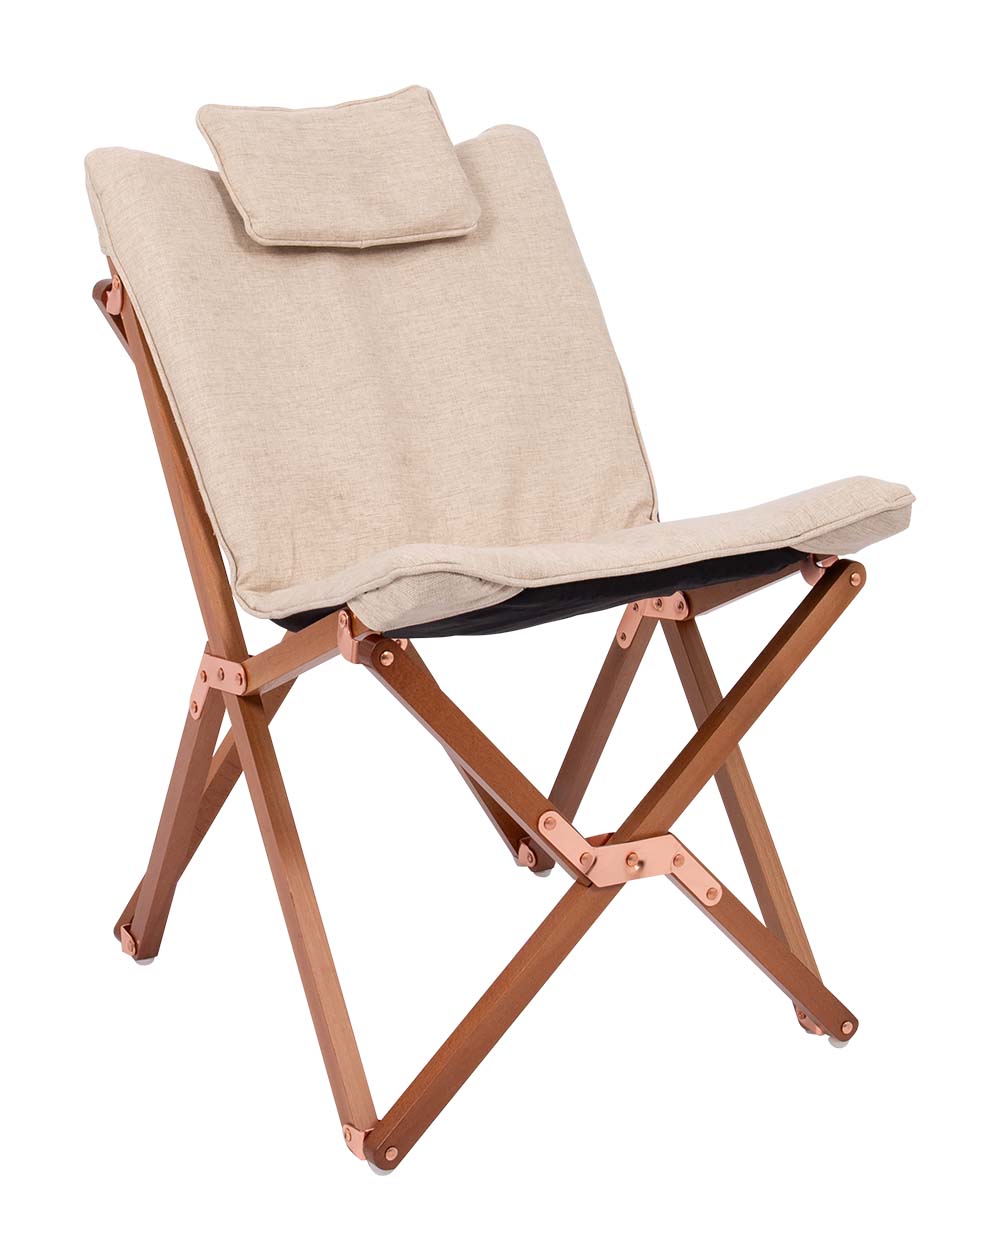 1200349 Bo-Camp - Urban Outdoor collection - Sillón relax - Bloomsbury - S - Poliéster oxford - Beige